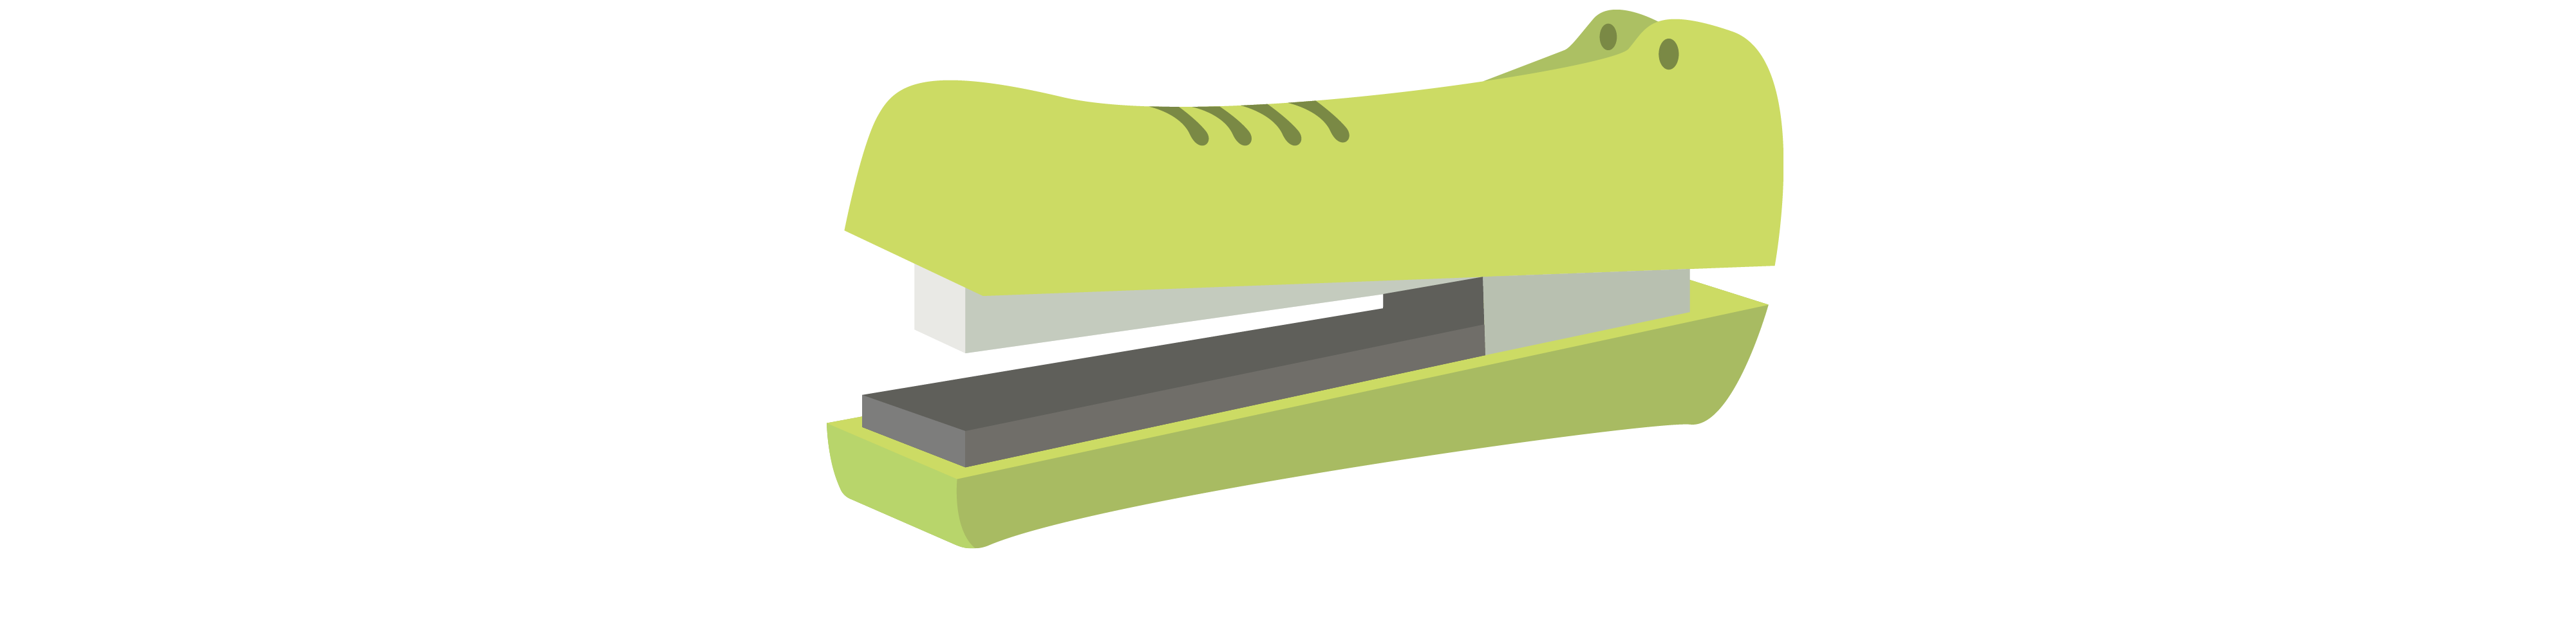 A stapler sits open, styled to anthropomorphize an alligator's mouth with the metallic stapling part resembling teeth, light green casing on the top and bottom and eyes at the back on the top.